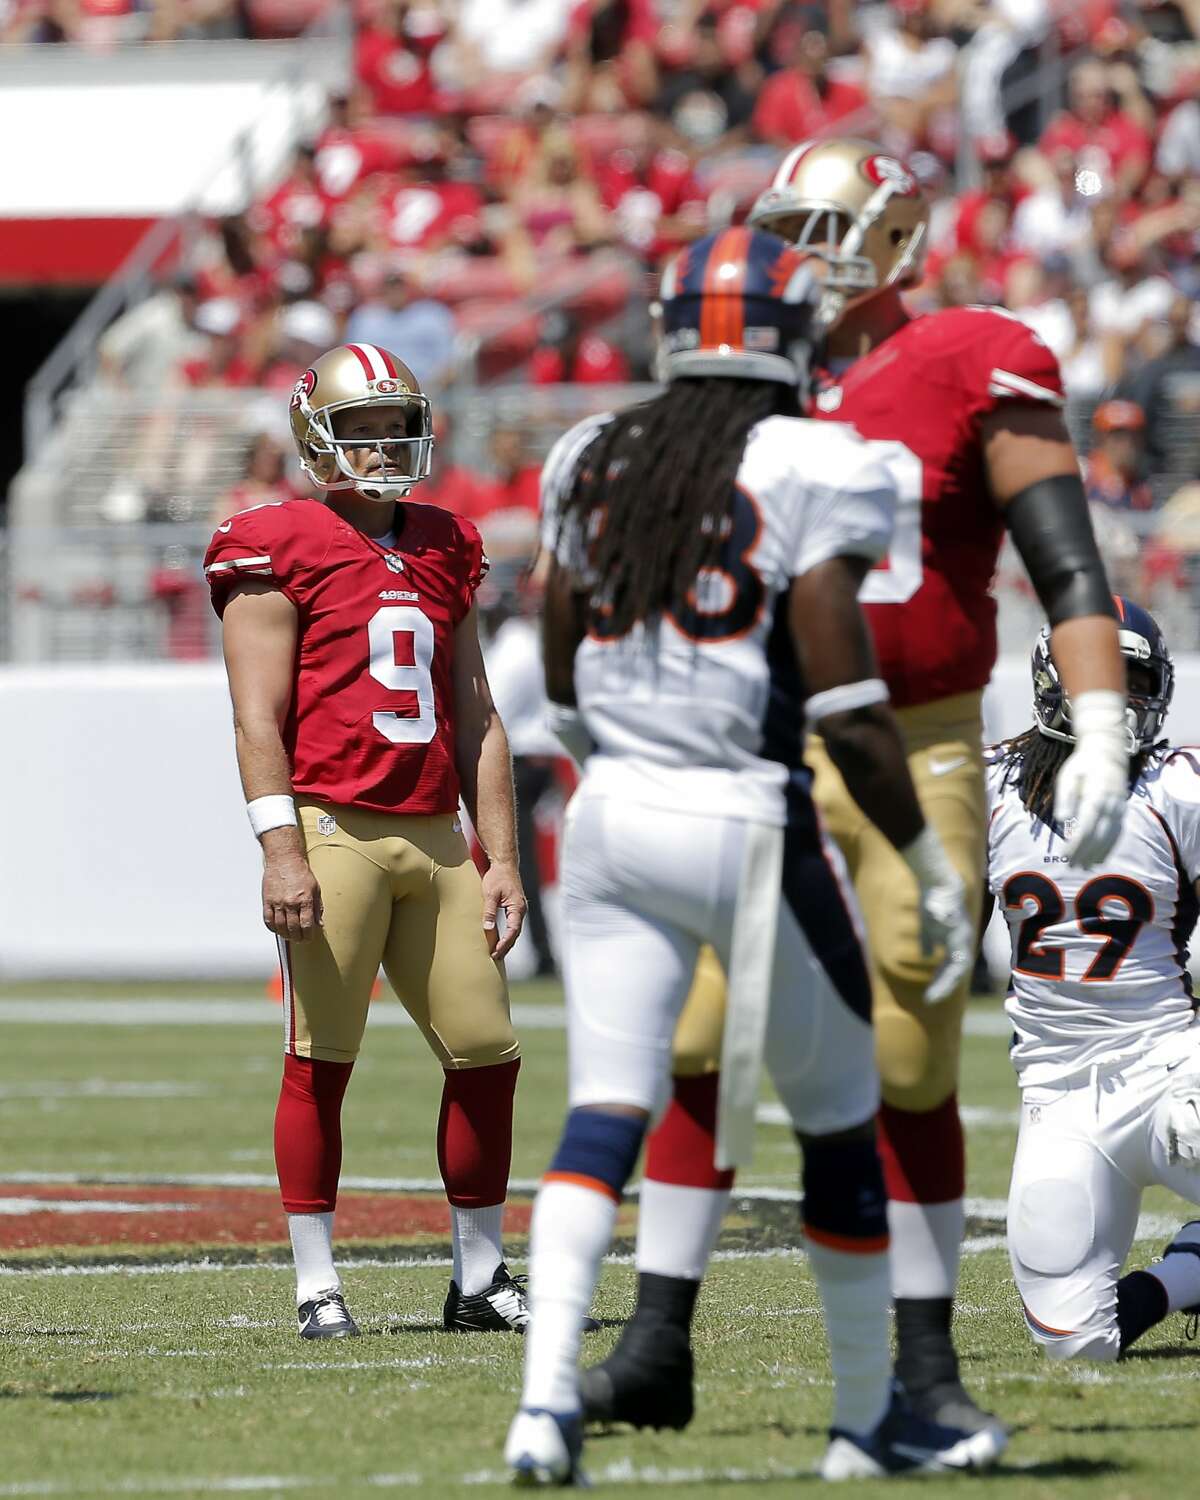 Phil Dawson (9) watches as he misses his second field goal attempt in the first half as the 49ers play the Denver Broncos in the first preseason game at Levi's Stadium in Santa Clara, Calif., on Sunday, August 17, 2014.